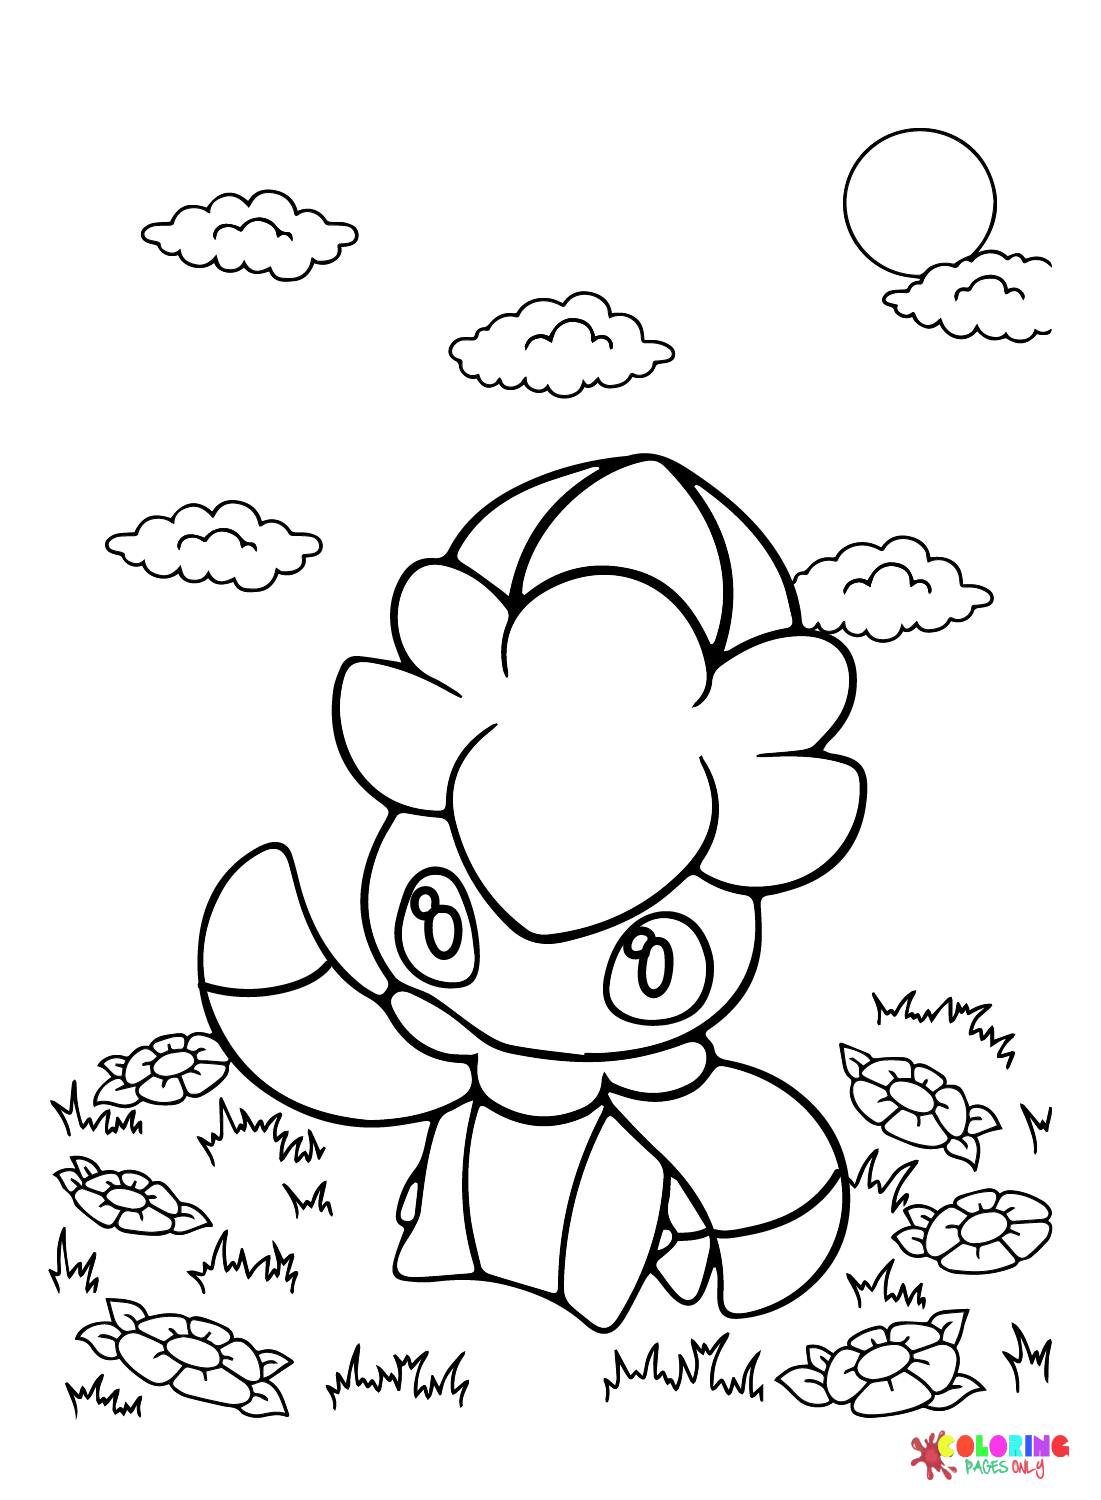 The Fomantis from Fomantis